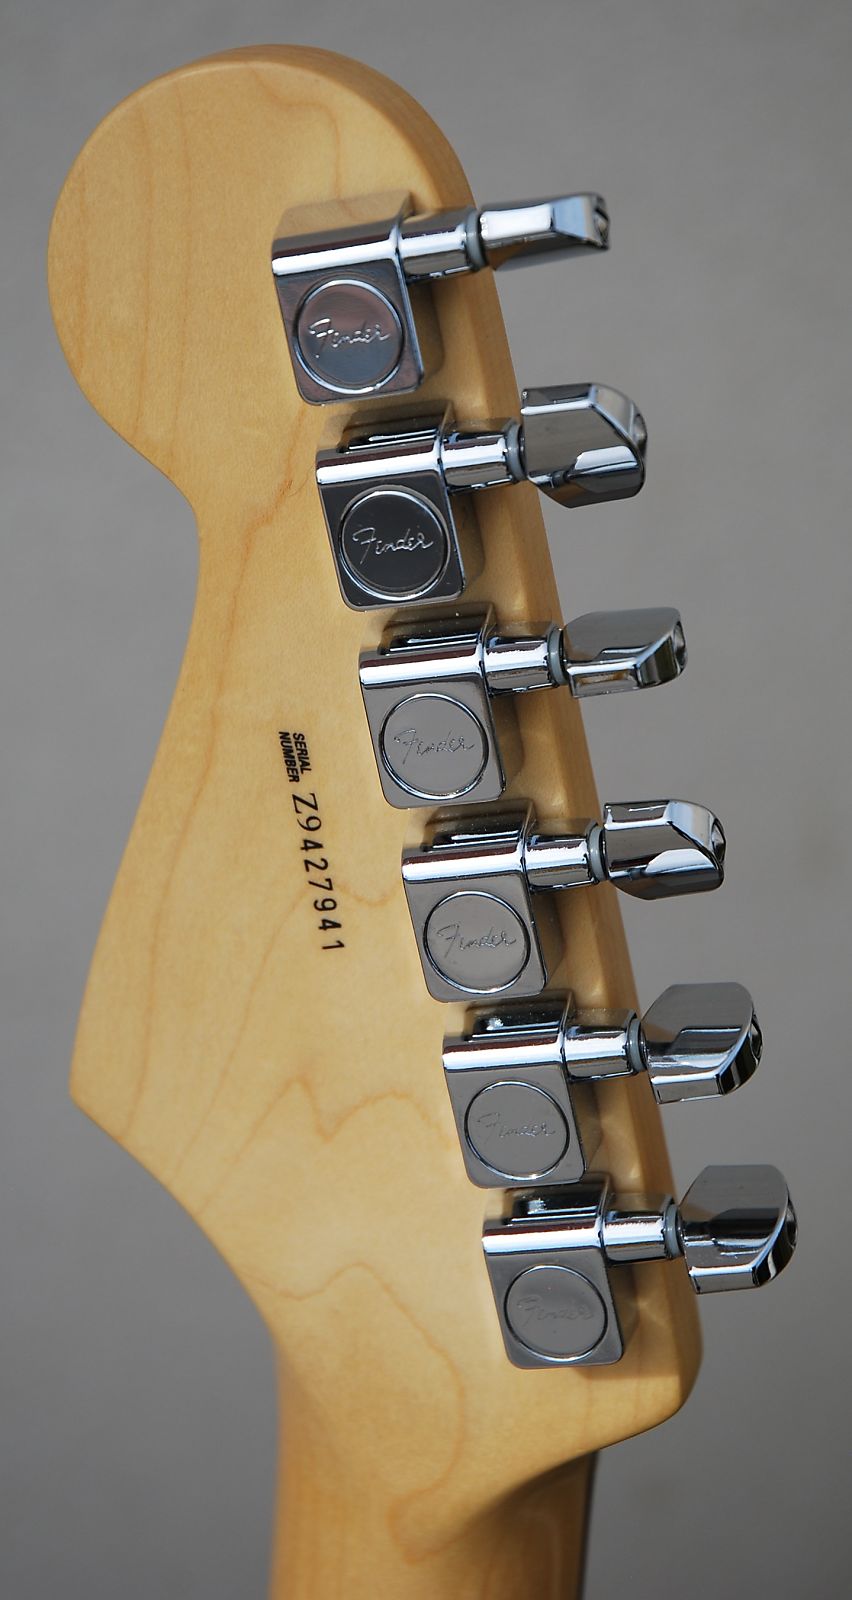 American Standard Stratocaster (Second Series) - FUZZFACED